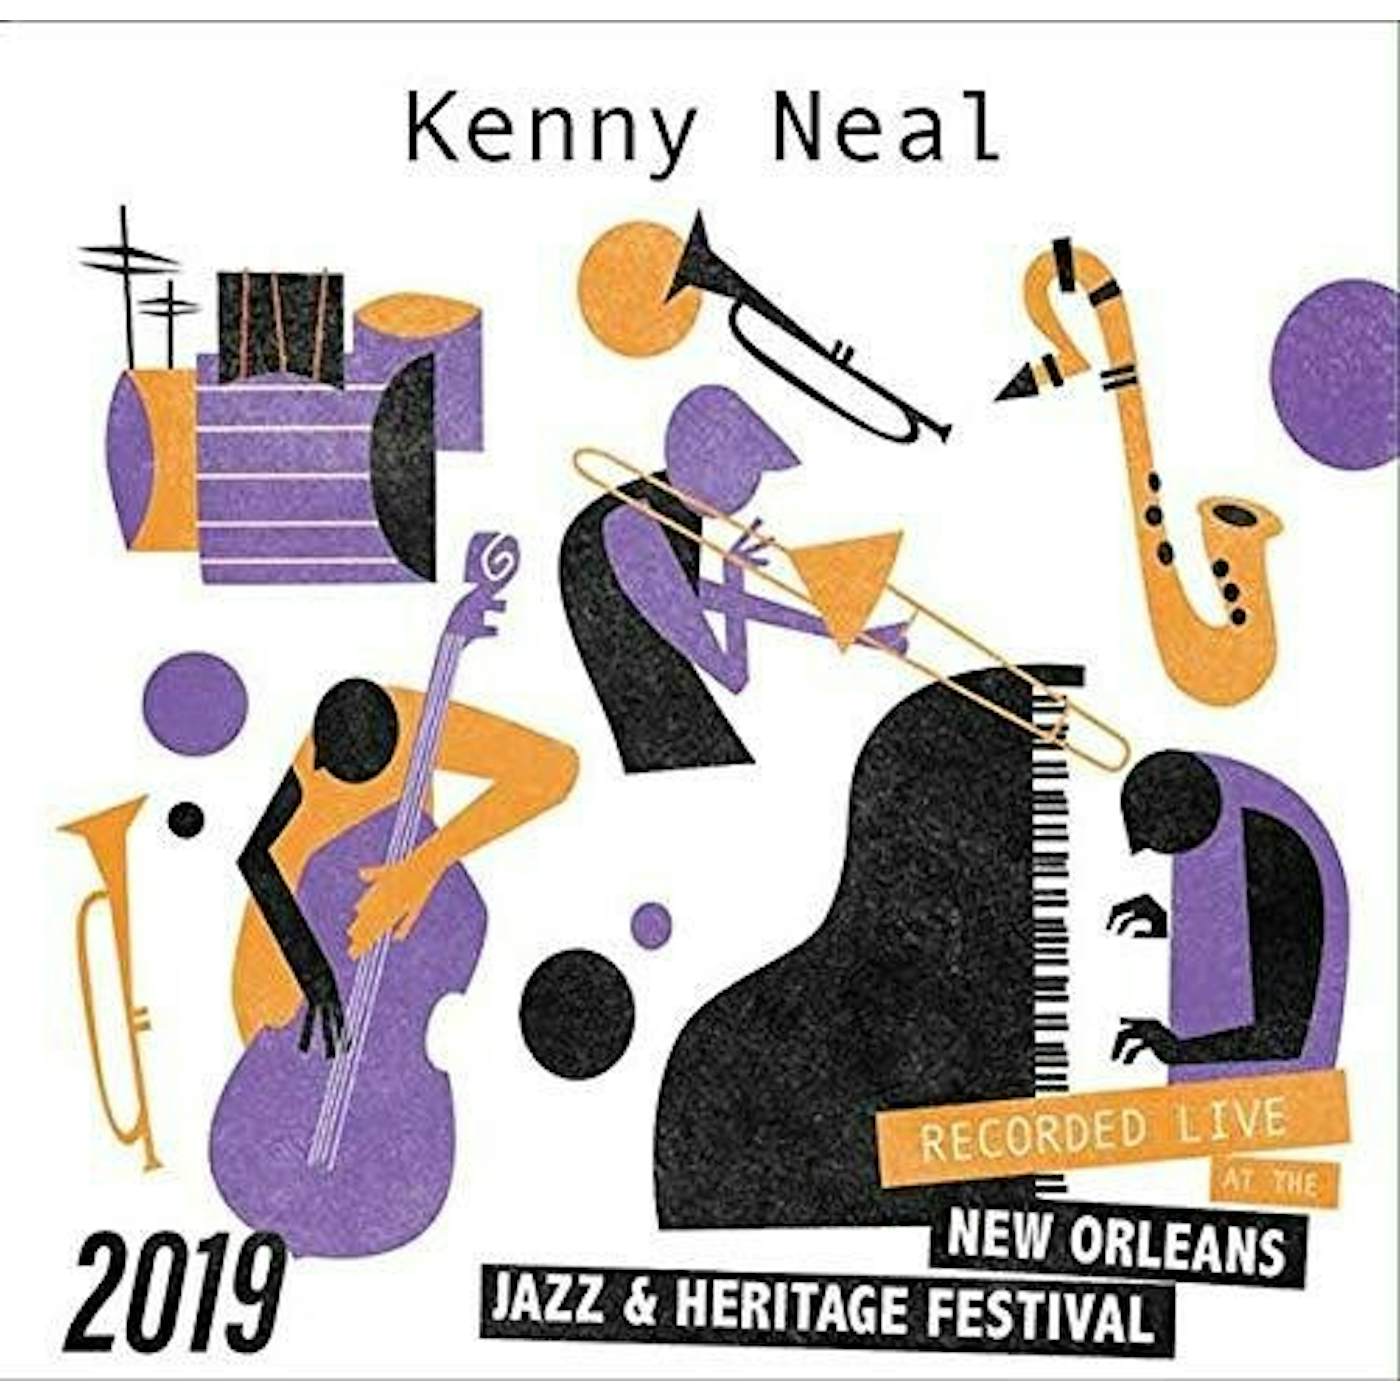 Kenny Neal LIVE AT JAZZFEST 2019 CD